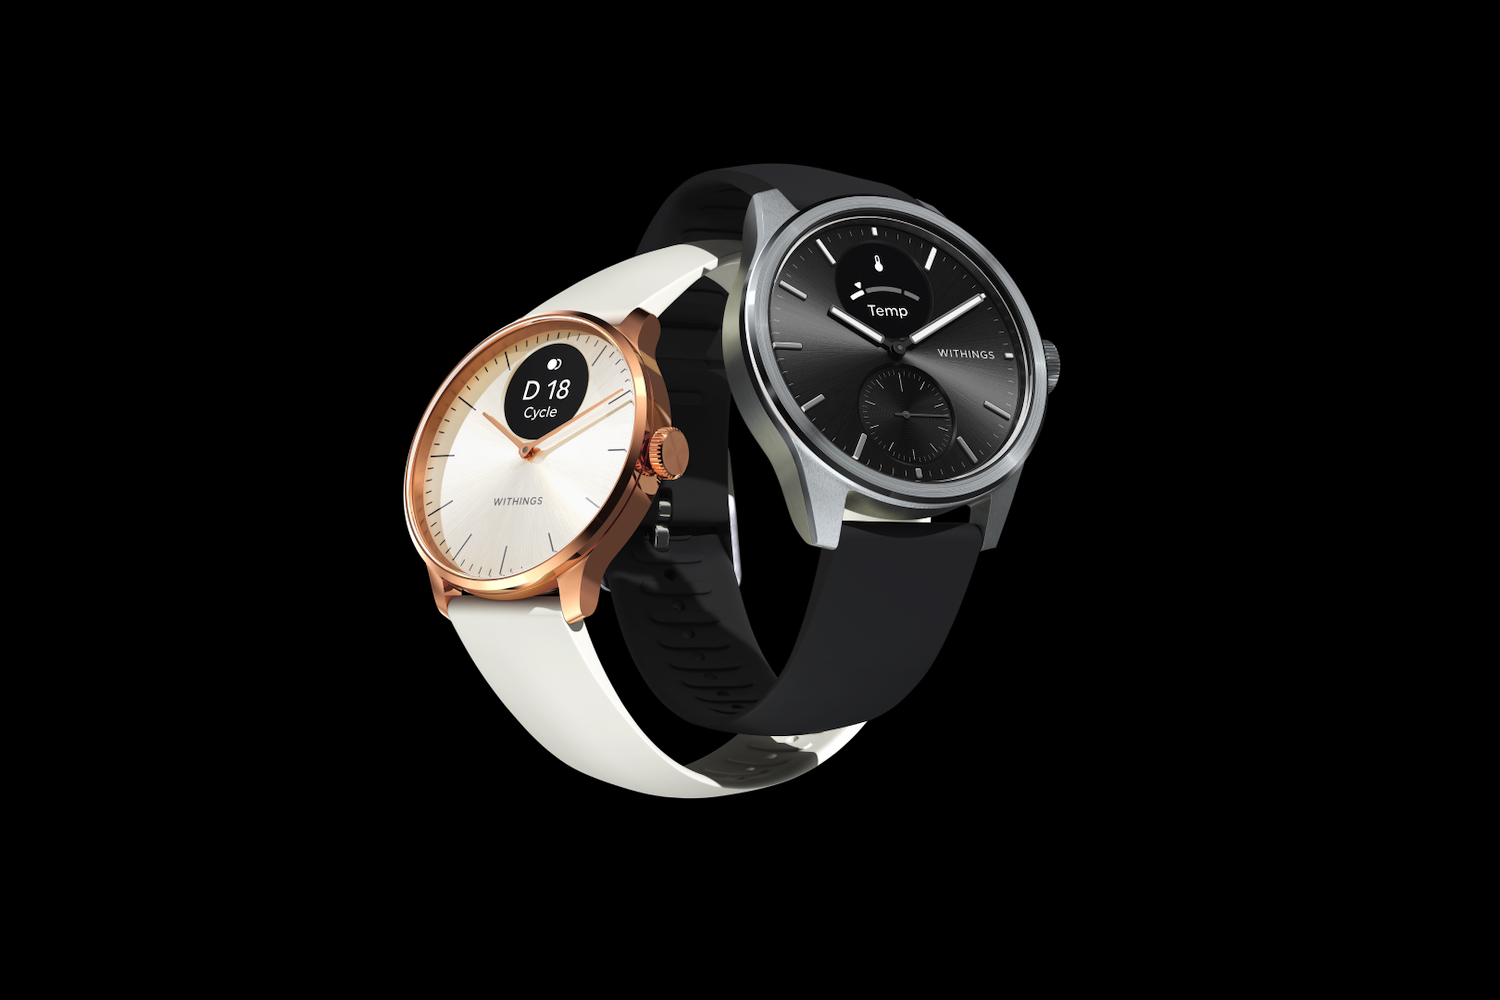 Withings' new health watch can check for sleep apnea - CNET